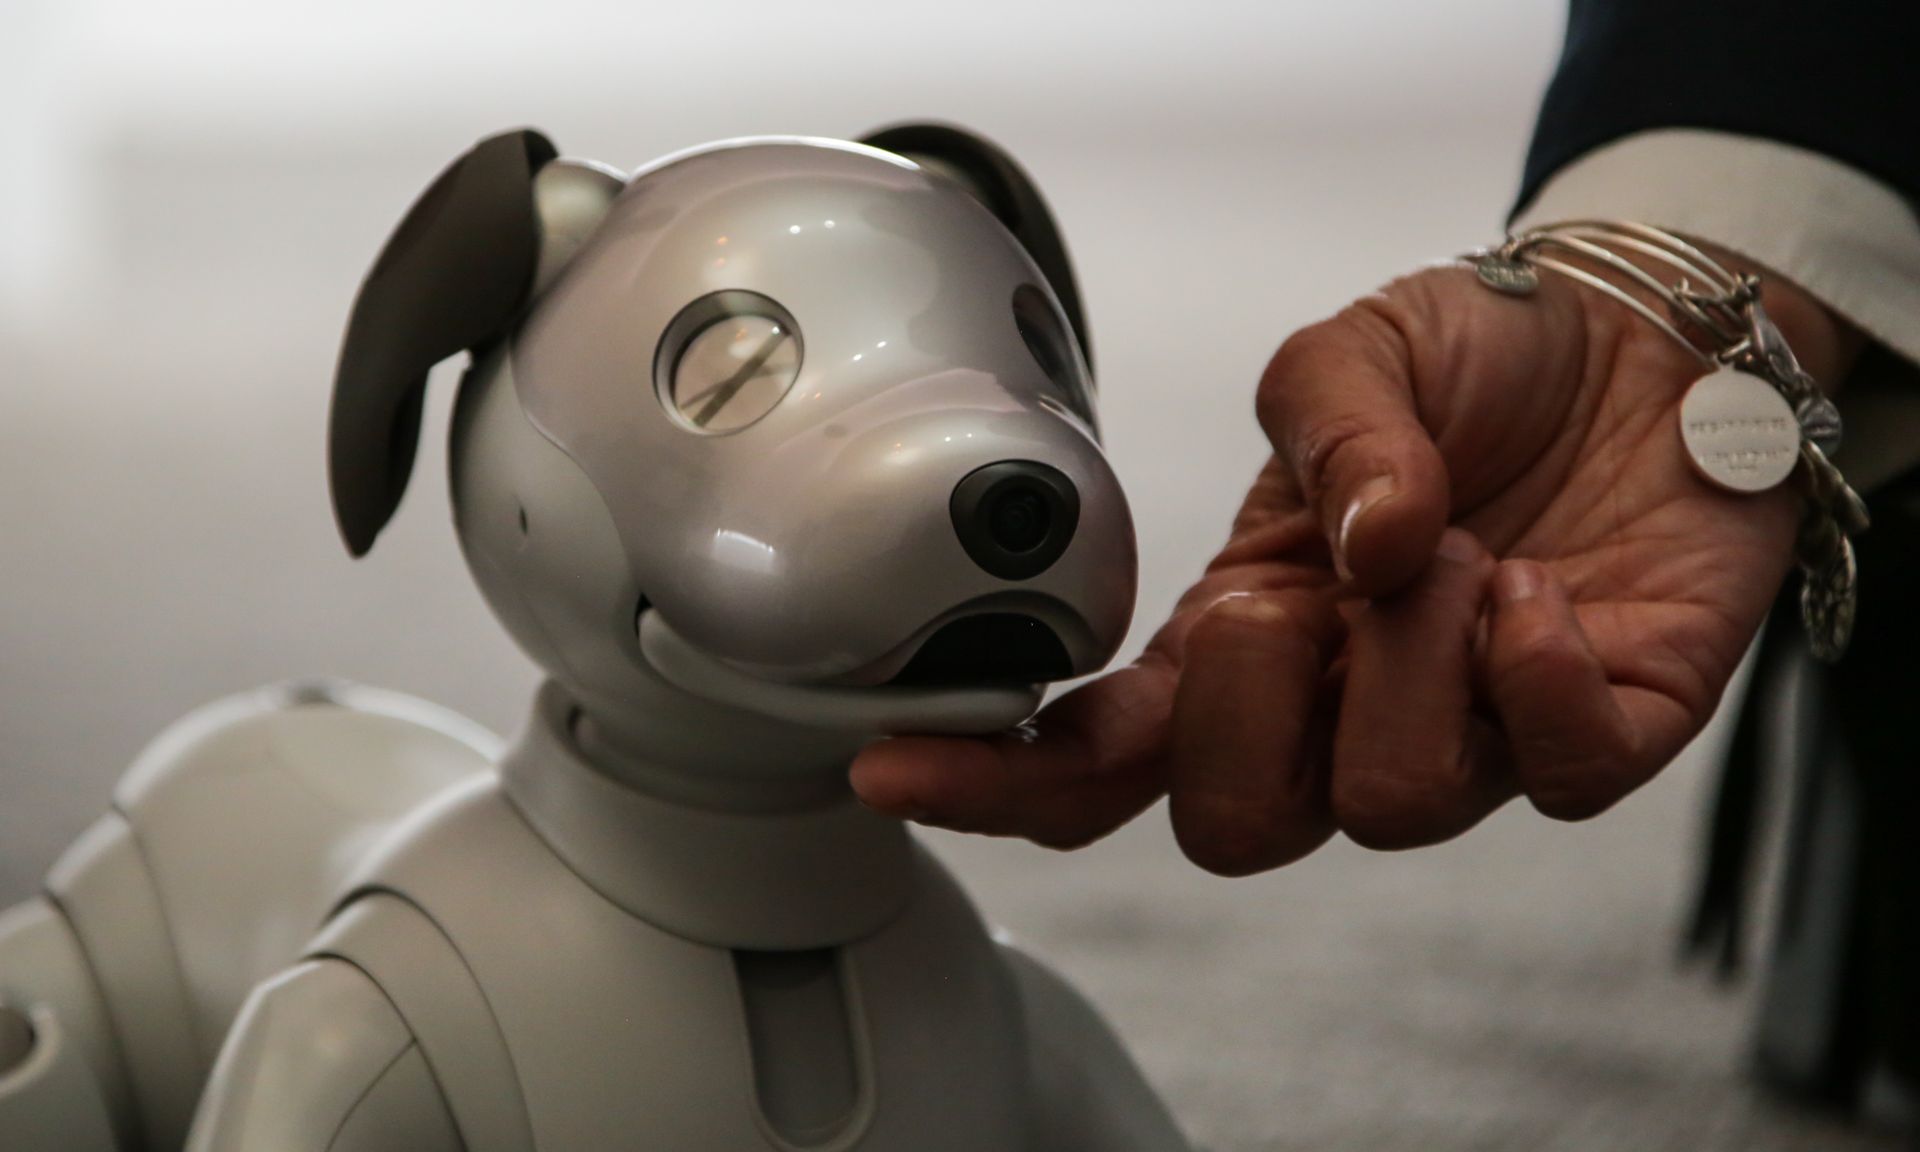 #CES 2018 | 2018 CES Visitors were delighted with the new version of the Aibo robot